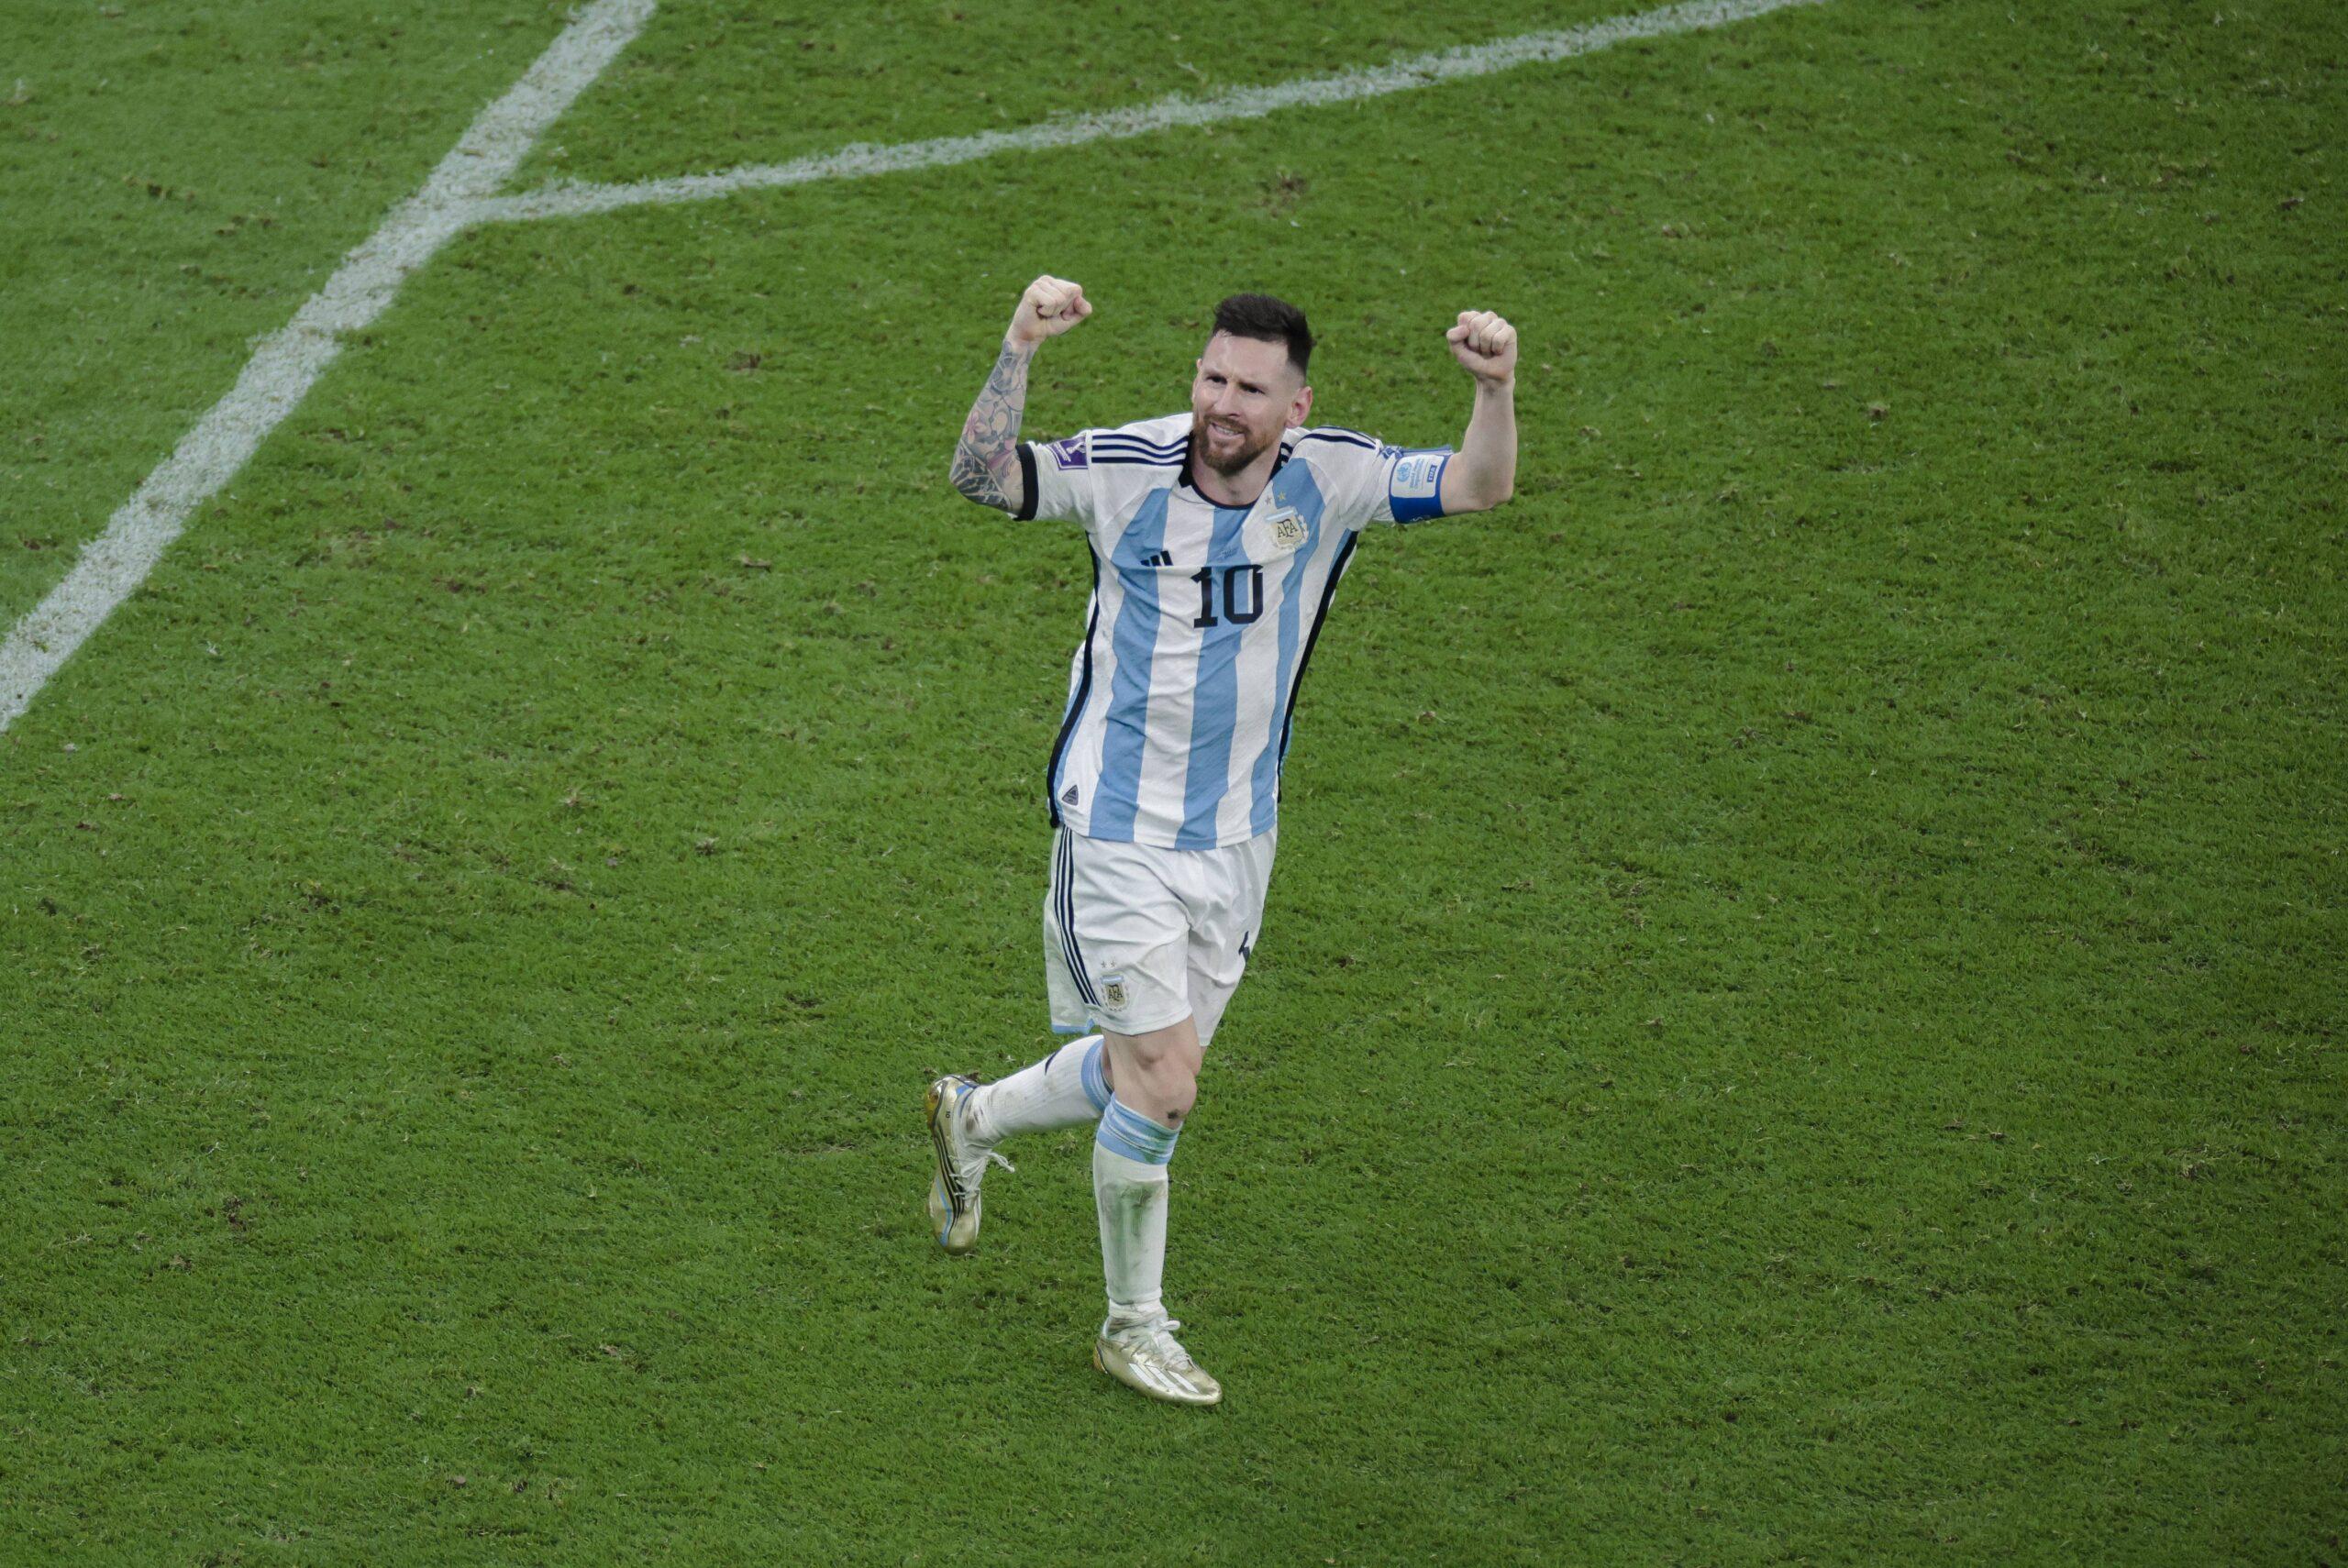 2022 FIFA World Cup Final Lionel Messi in Action